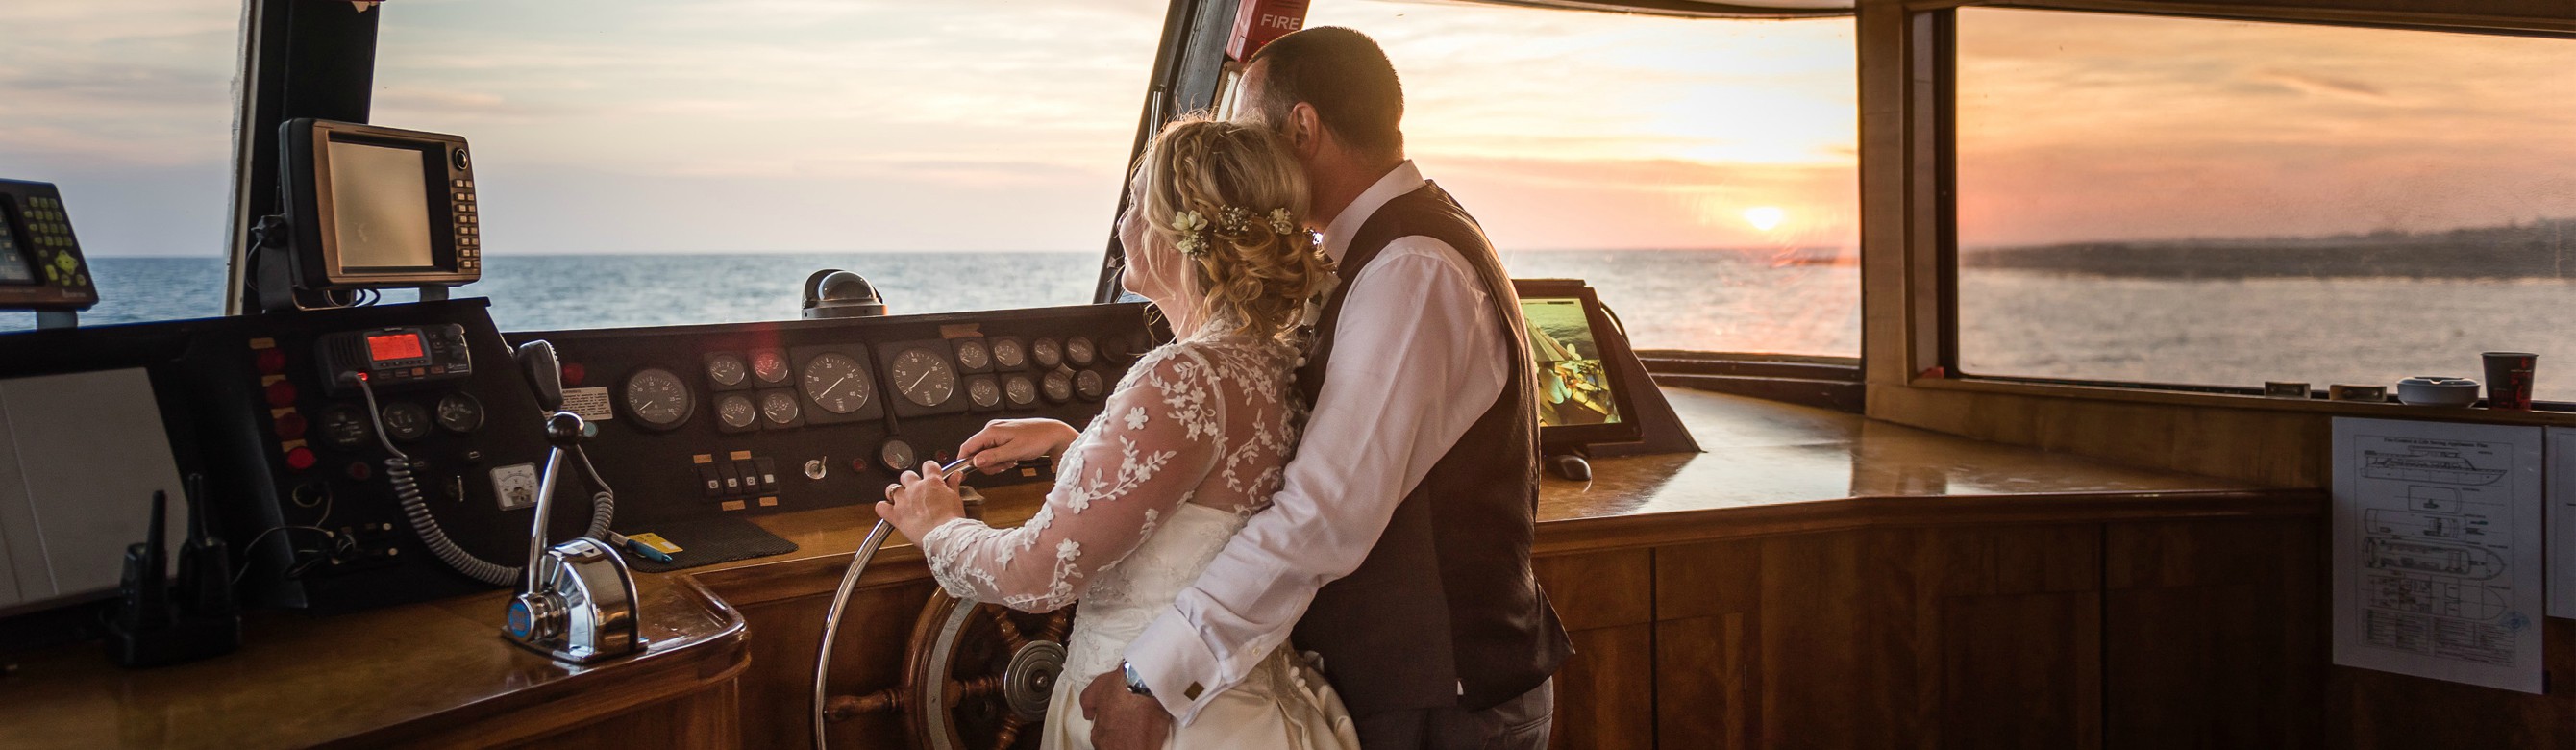 Book your wedding day in Jolly Roger - Paphos - Exclusive Yacht Weddings